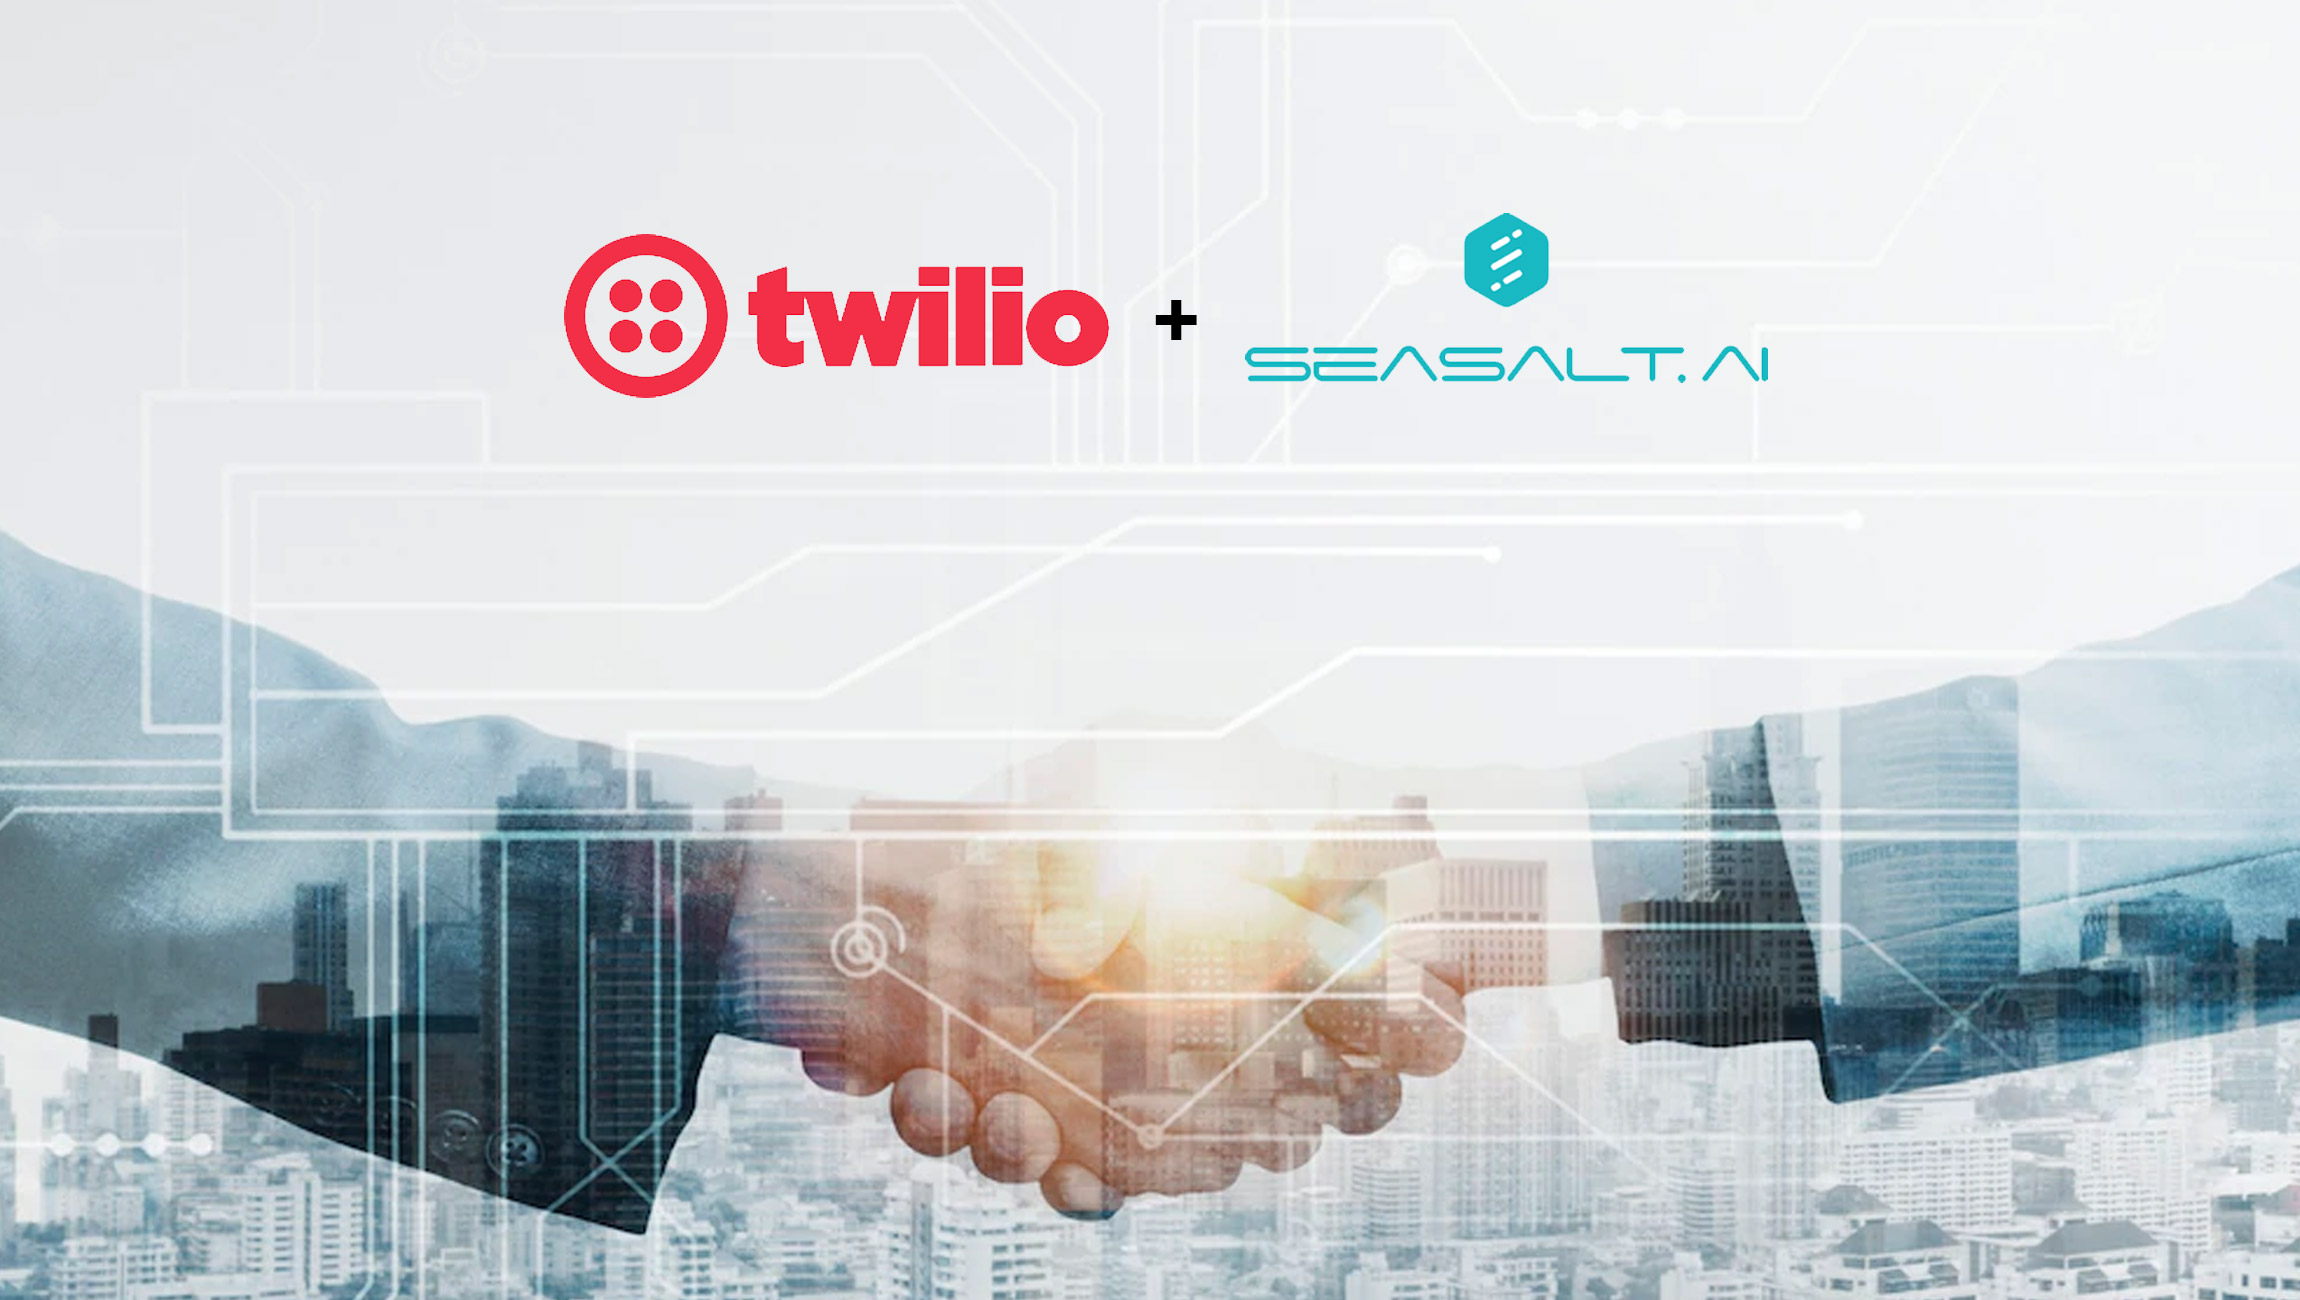 Twilio and Seasalt.ai Expand Partnership in Asia Pacific & Japan to Build Multi-Country Cloud Contact Centers